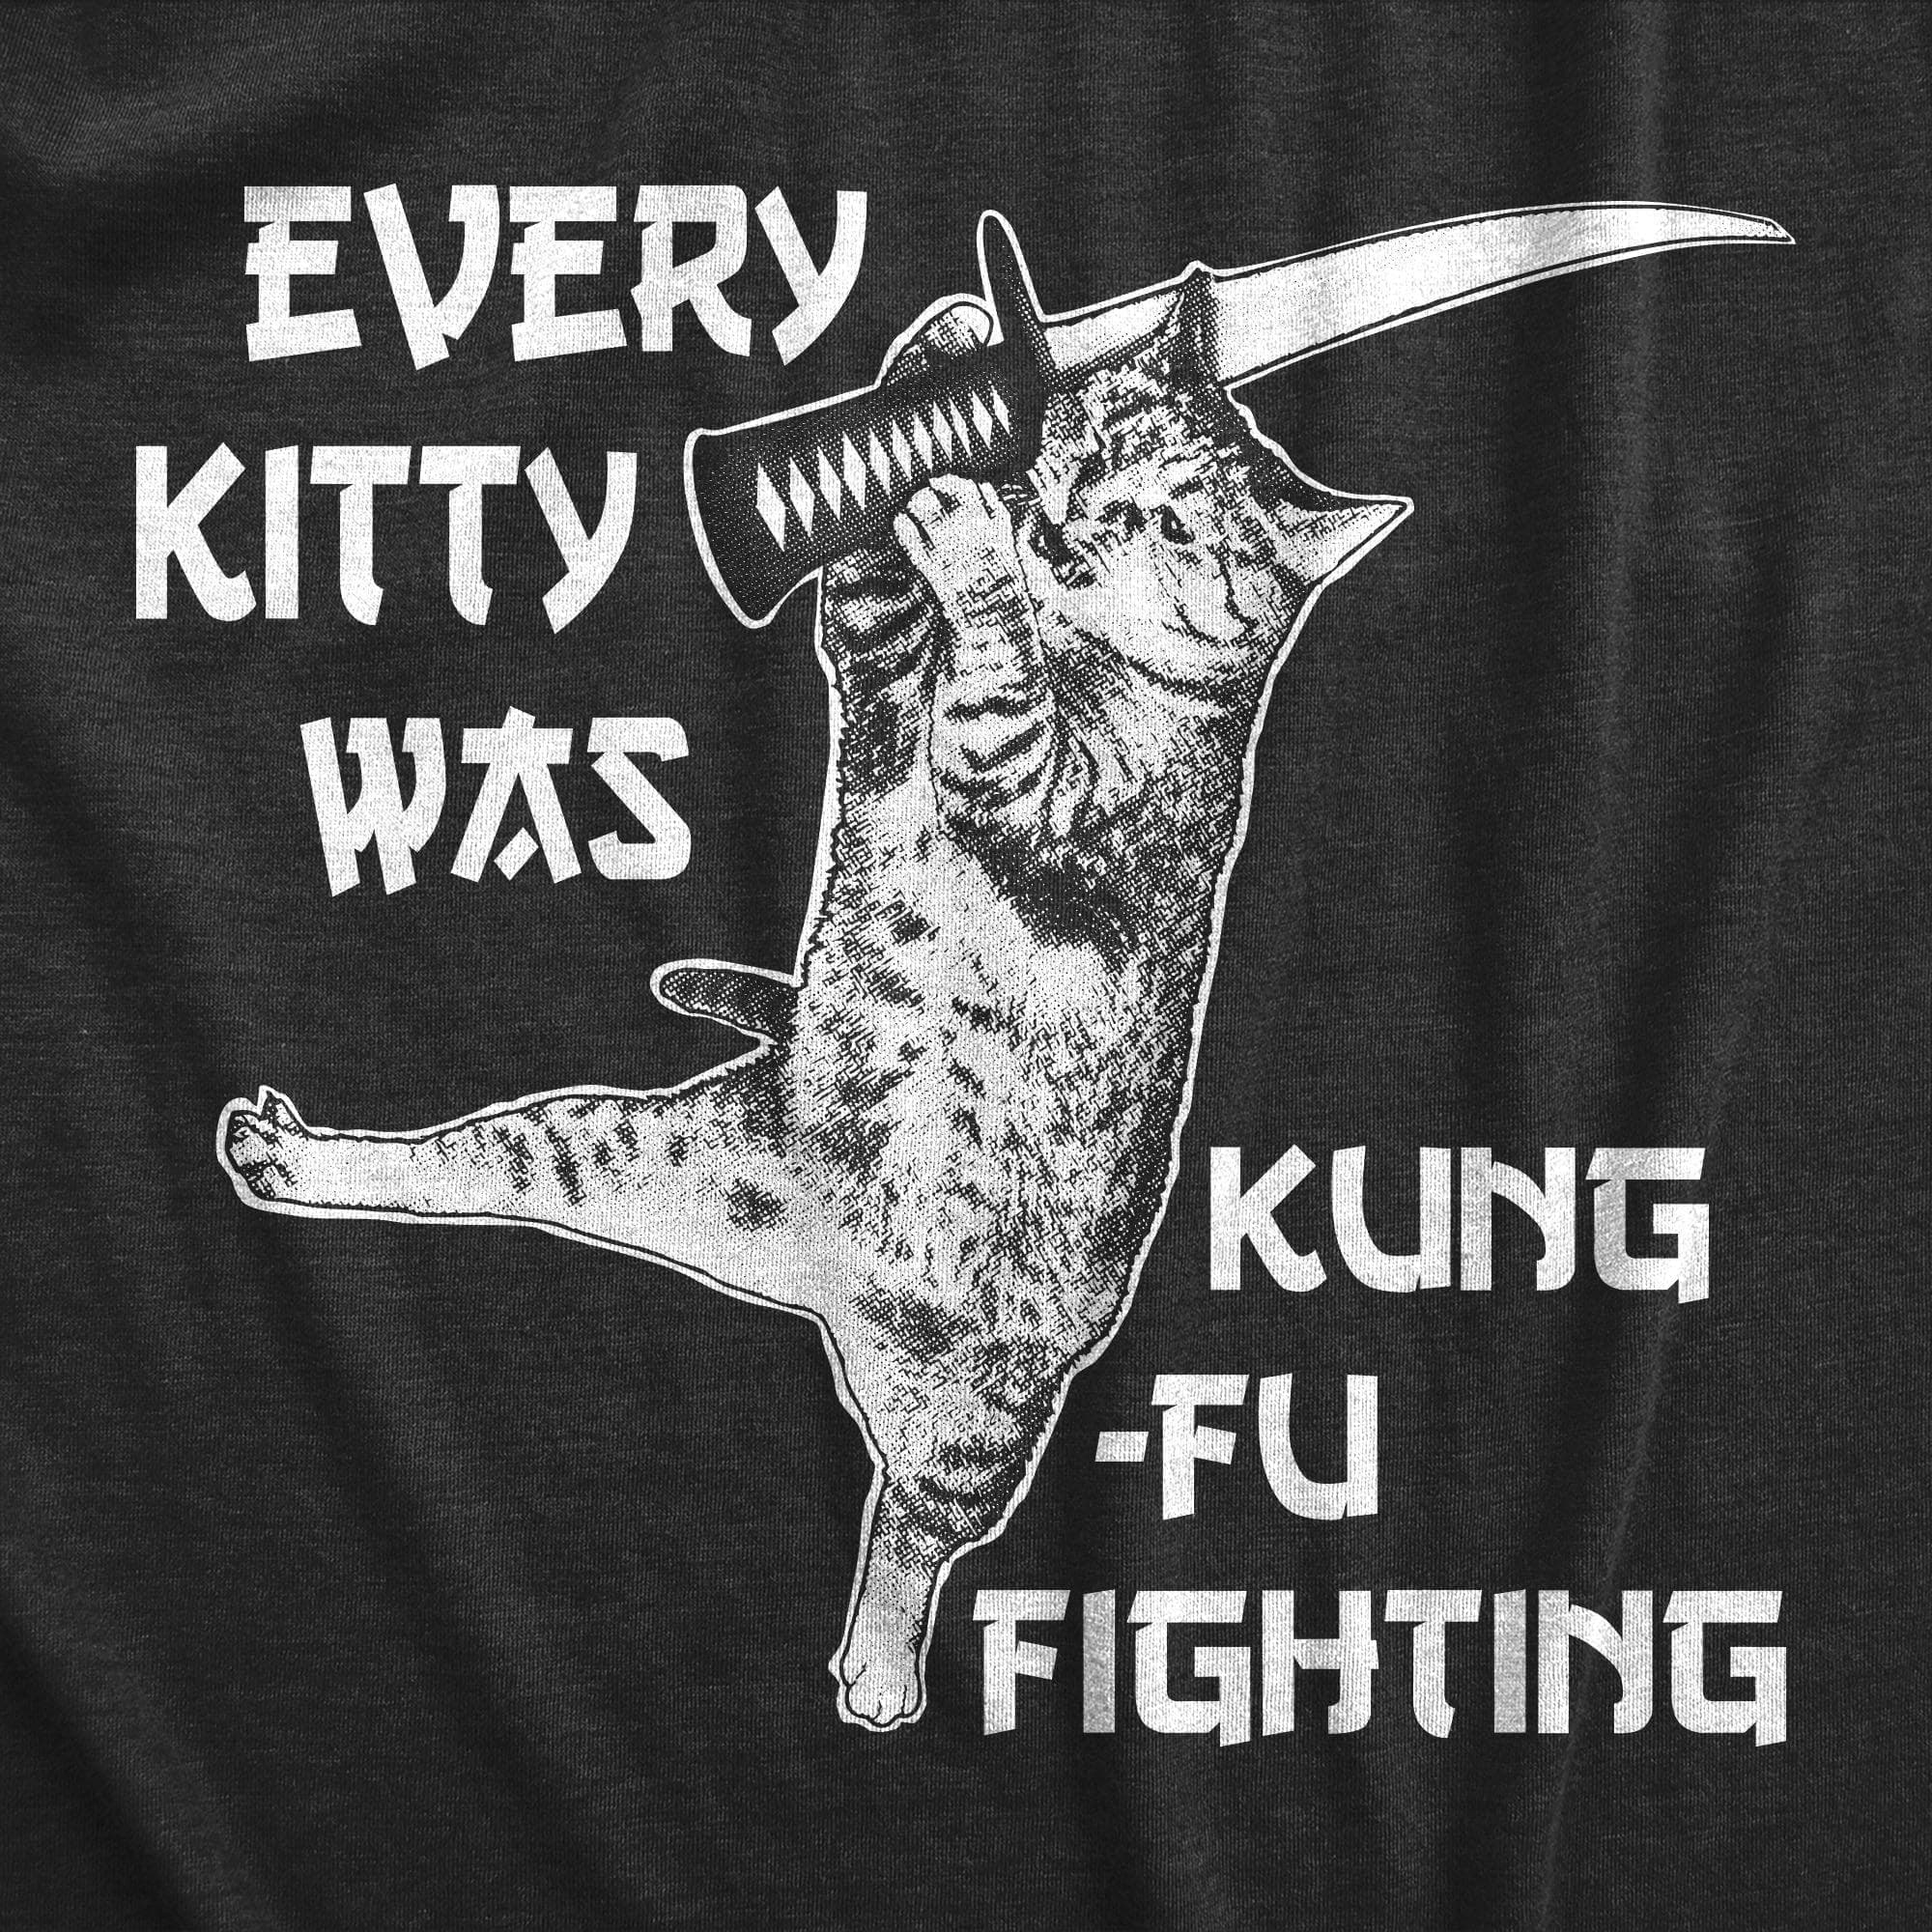 Every Kitty Was Kung Fu Fighting Men's Tshirt  -  Crazy Dog T-Shirts